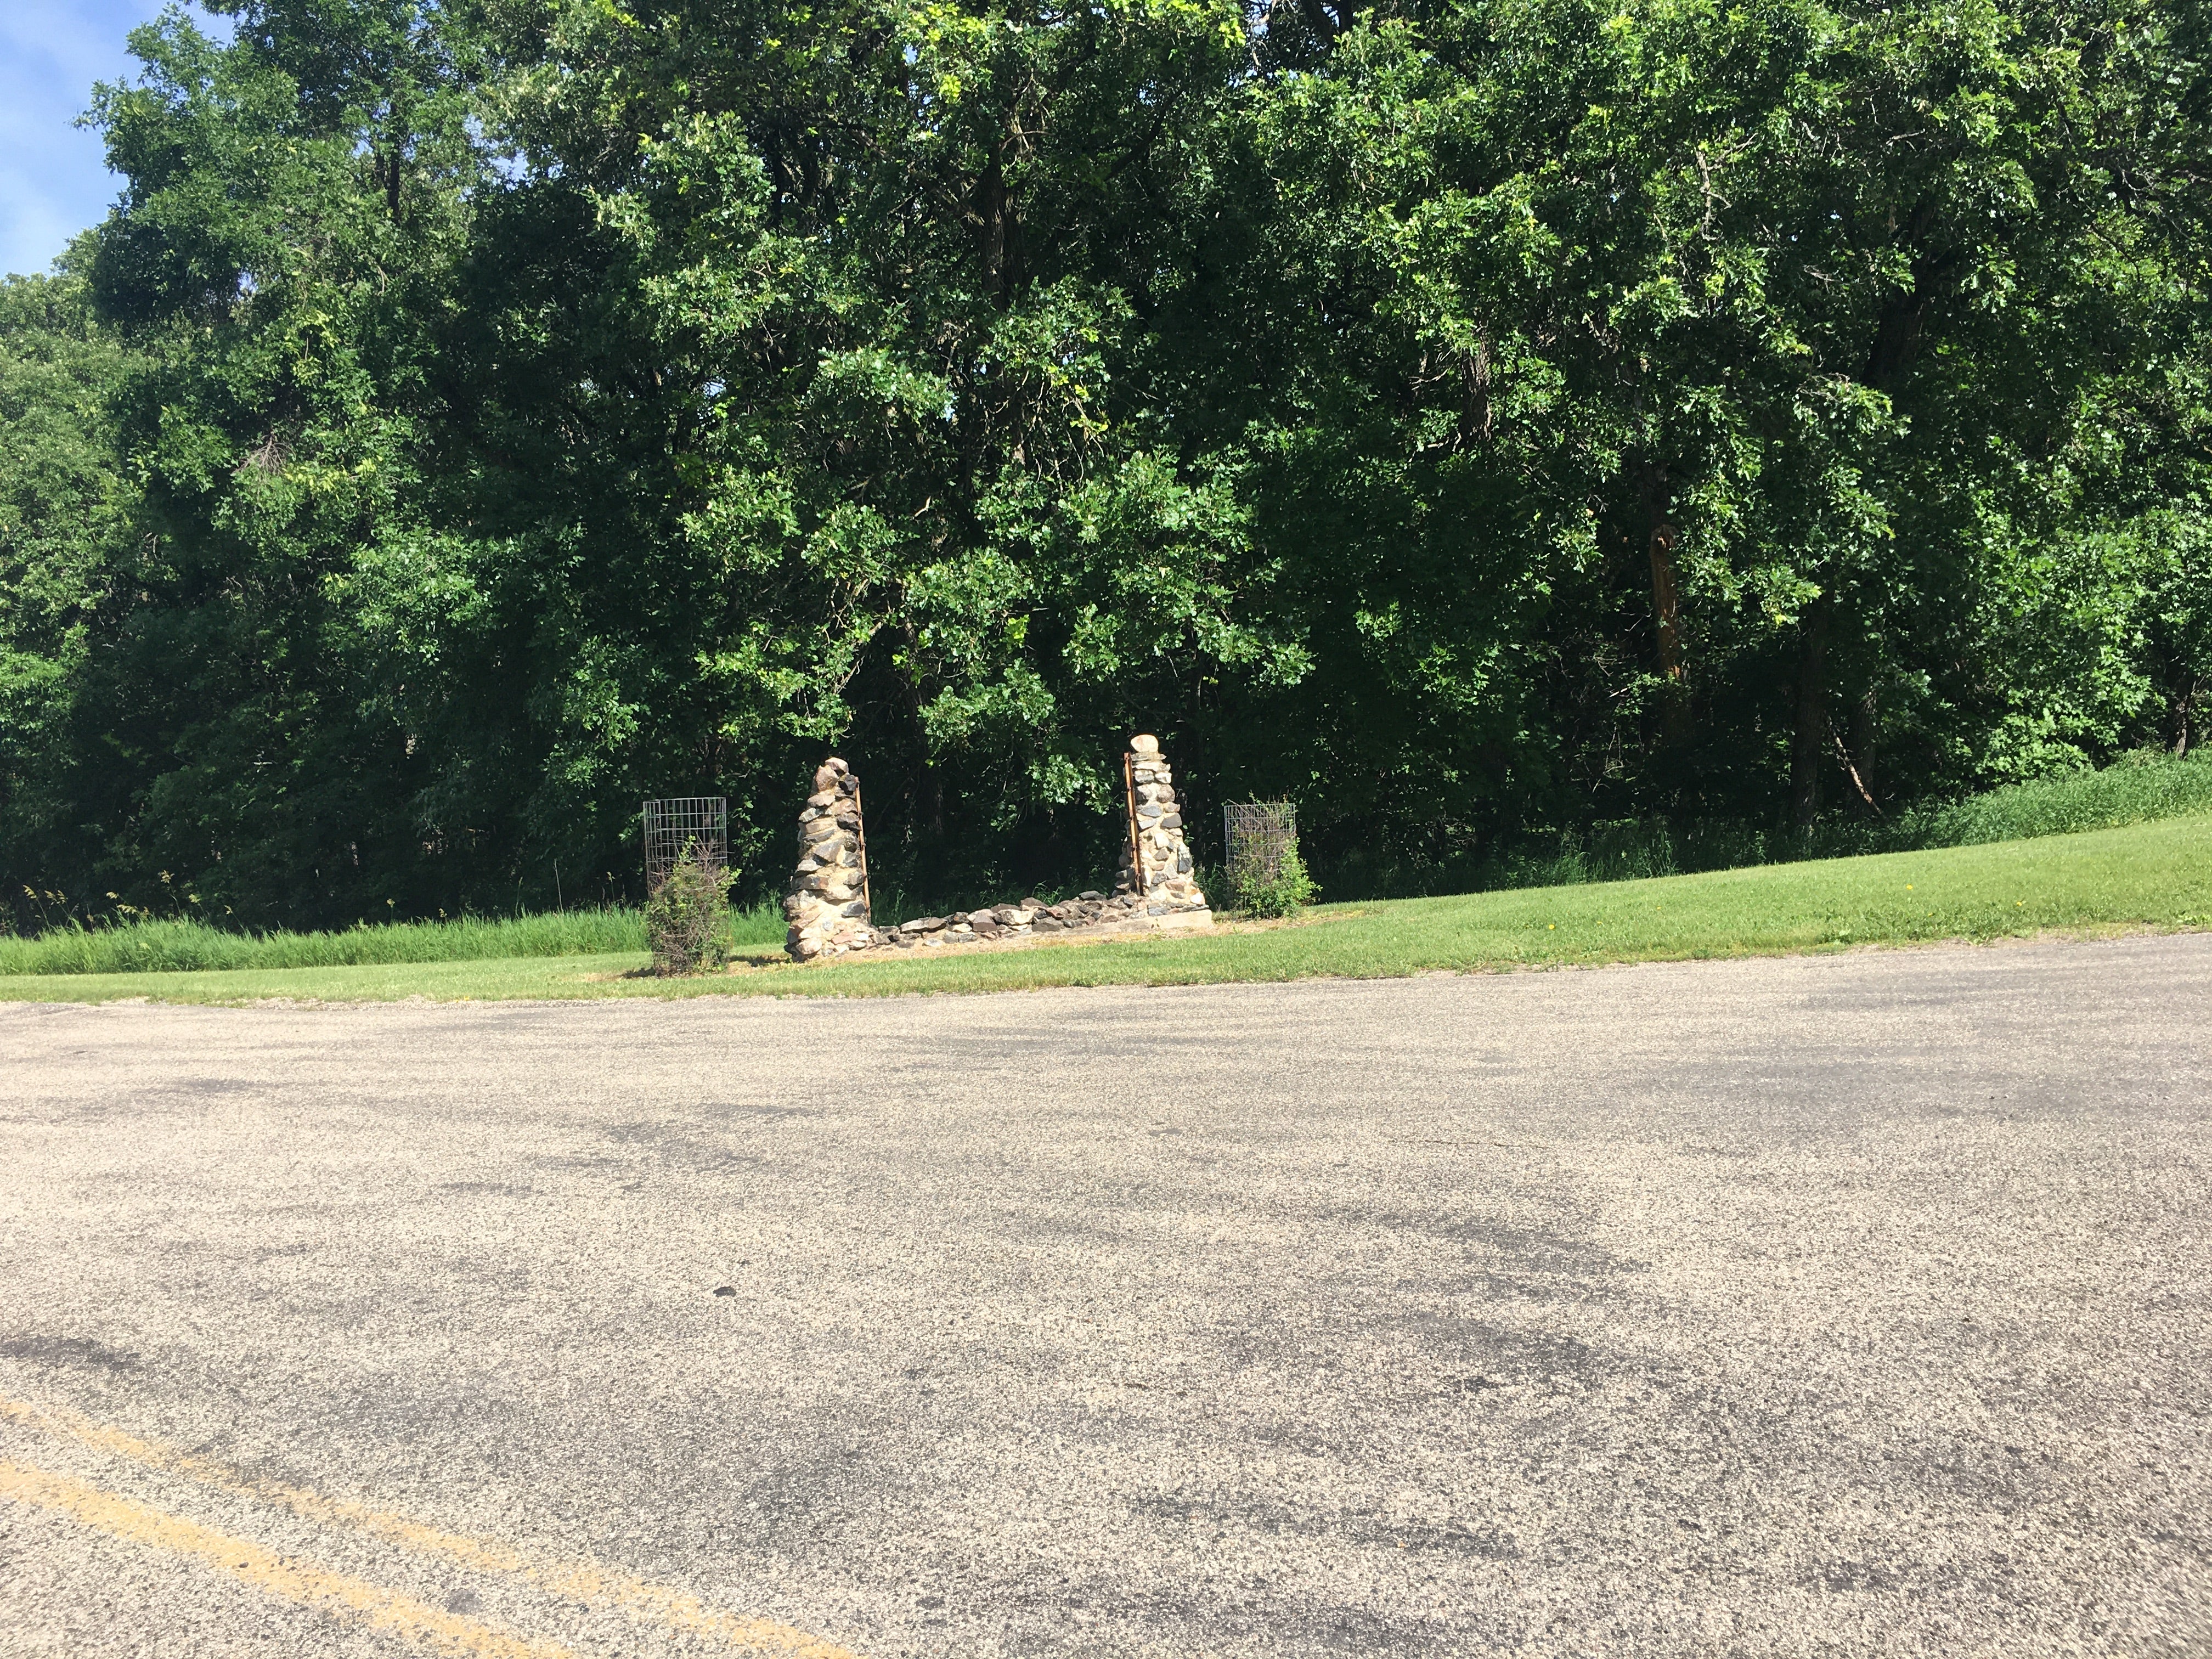 Park entrance sign was recently burned so look for these remaining pillars to mark to entrance